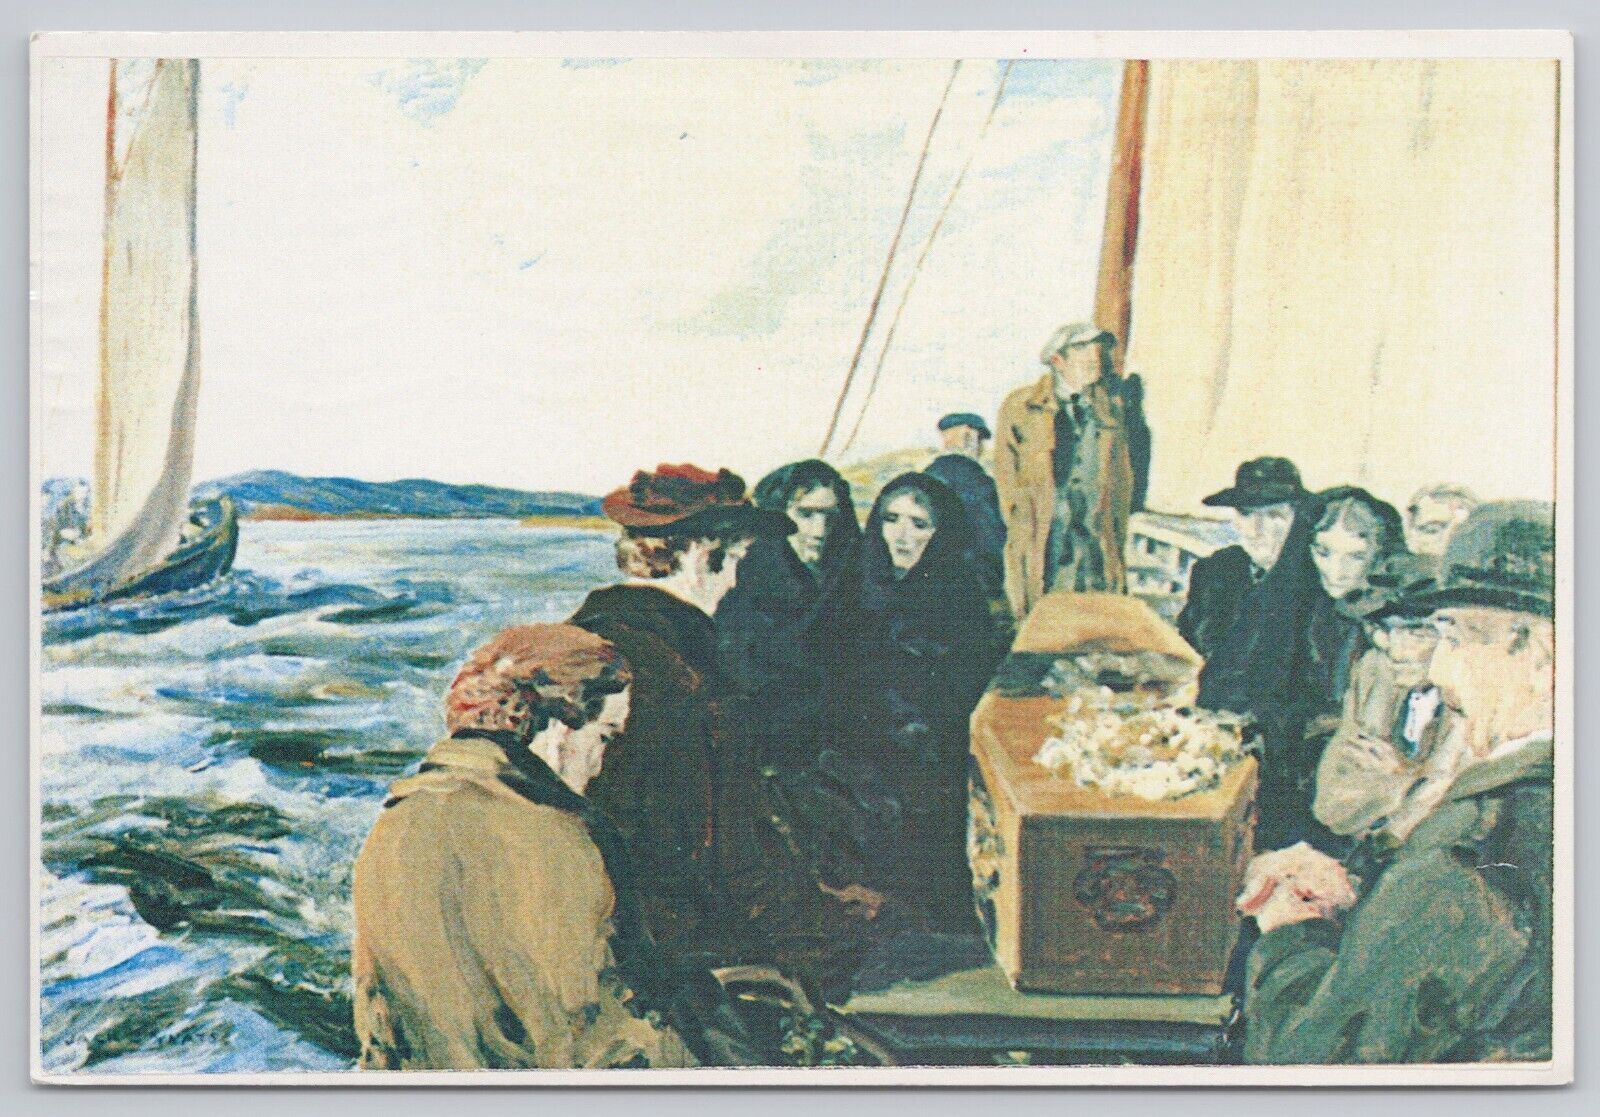 Leifear Donegal Ireland, The Island Funeral Painting Jack B. Yeats, VTG Postcard